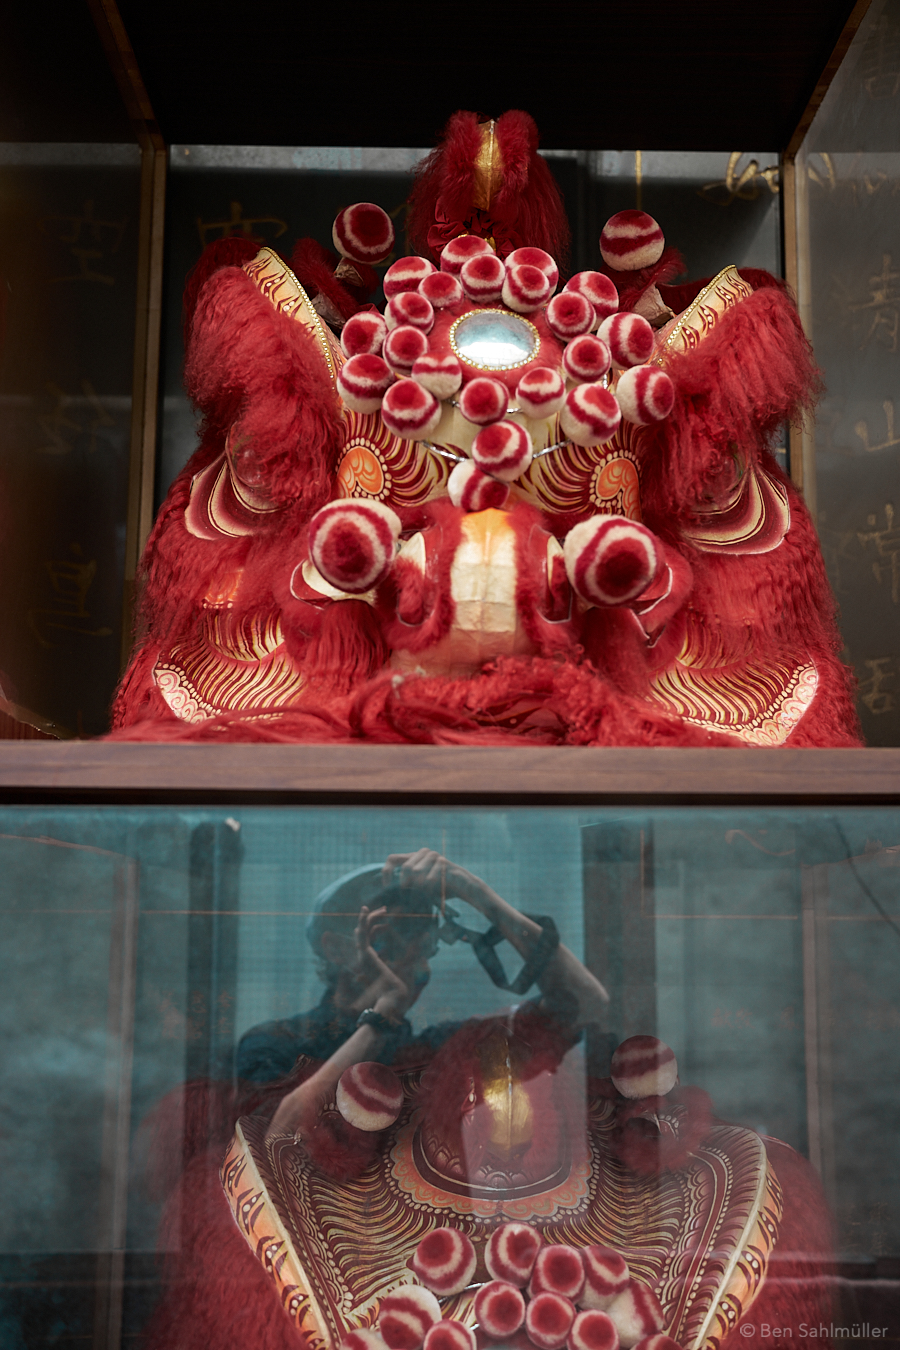 A red-golden mask used for a Chinese Lion Dance. In the glass pane underneath, a reflections shows me taking the photo.